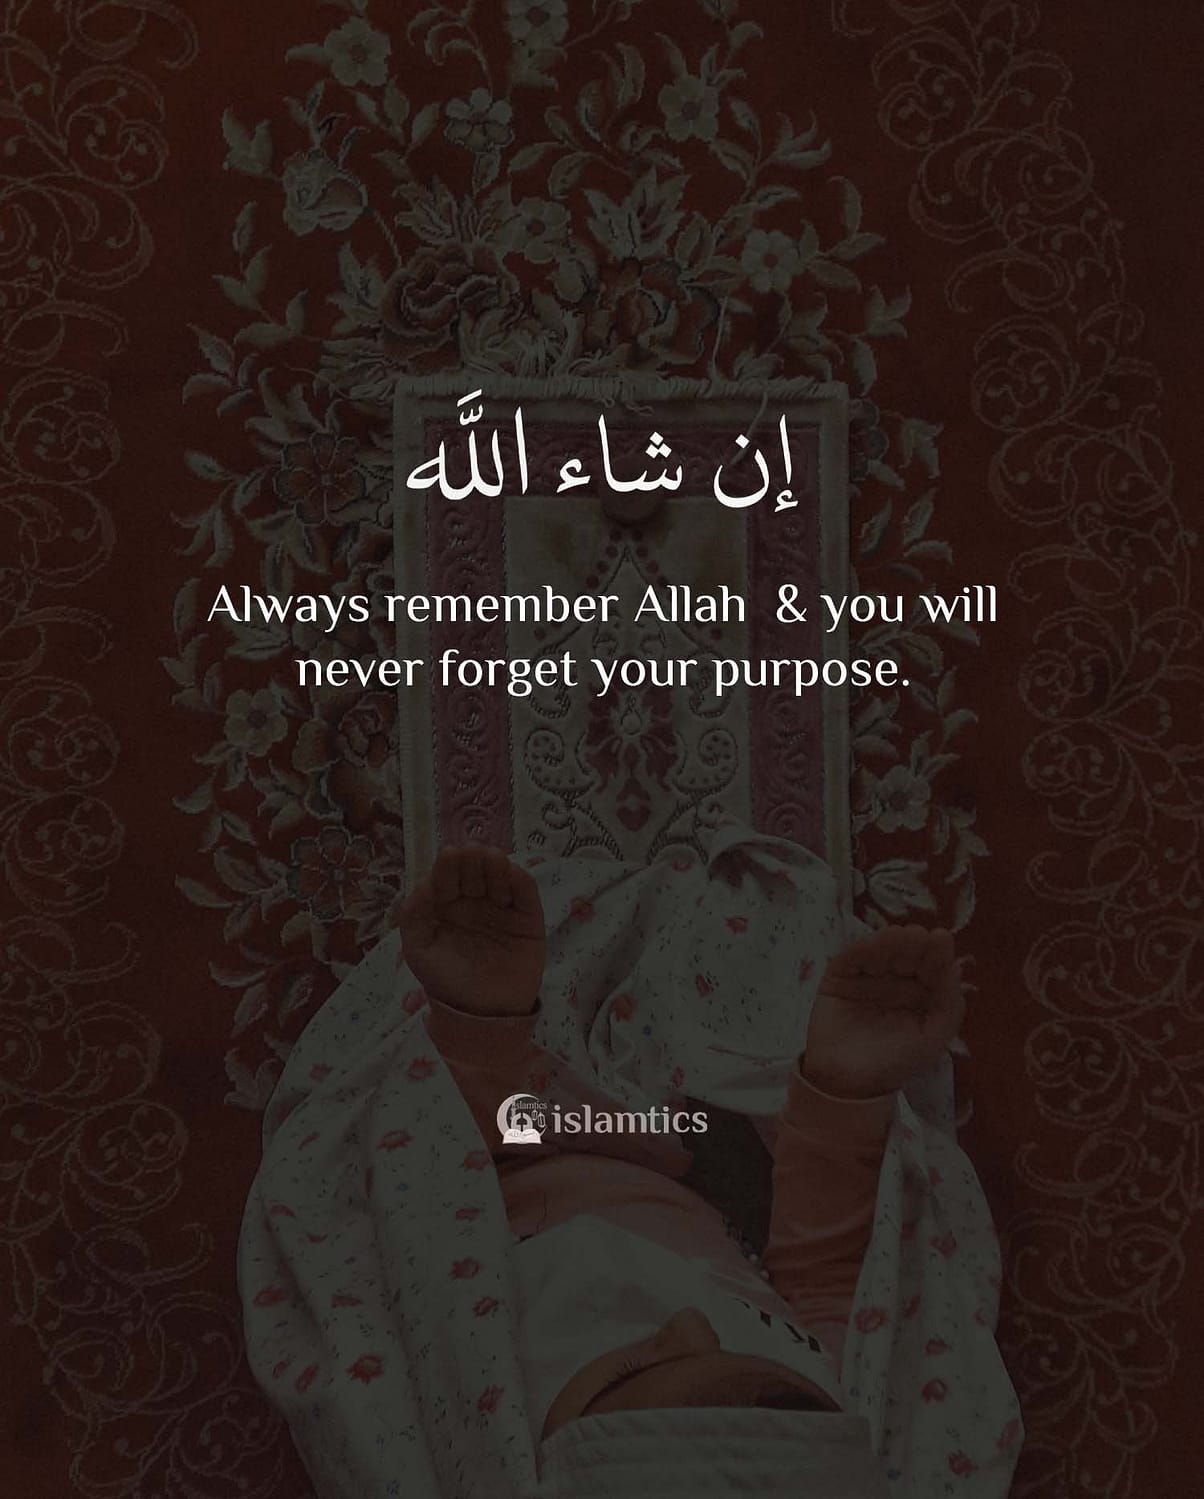 Always remember Allah & you will never forget your purpose.